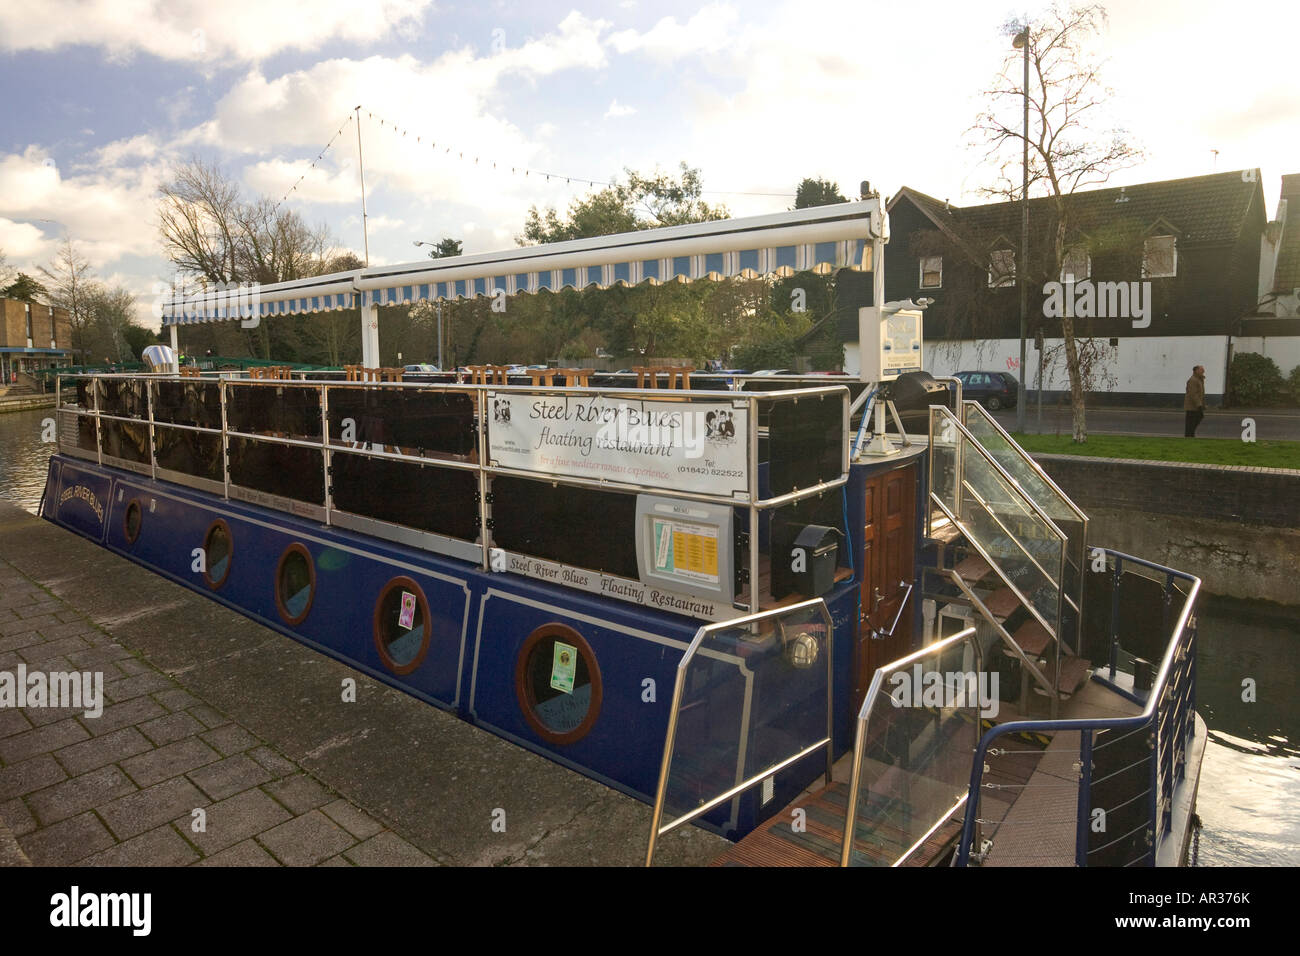 The restaurant "Steel River Blues" on a barge on the River Thet in Thetford town centre Stock Photo